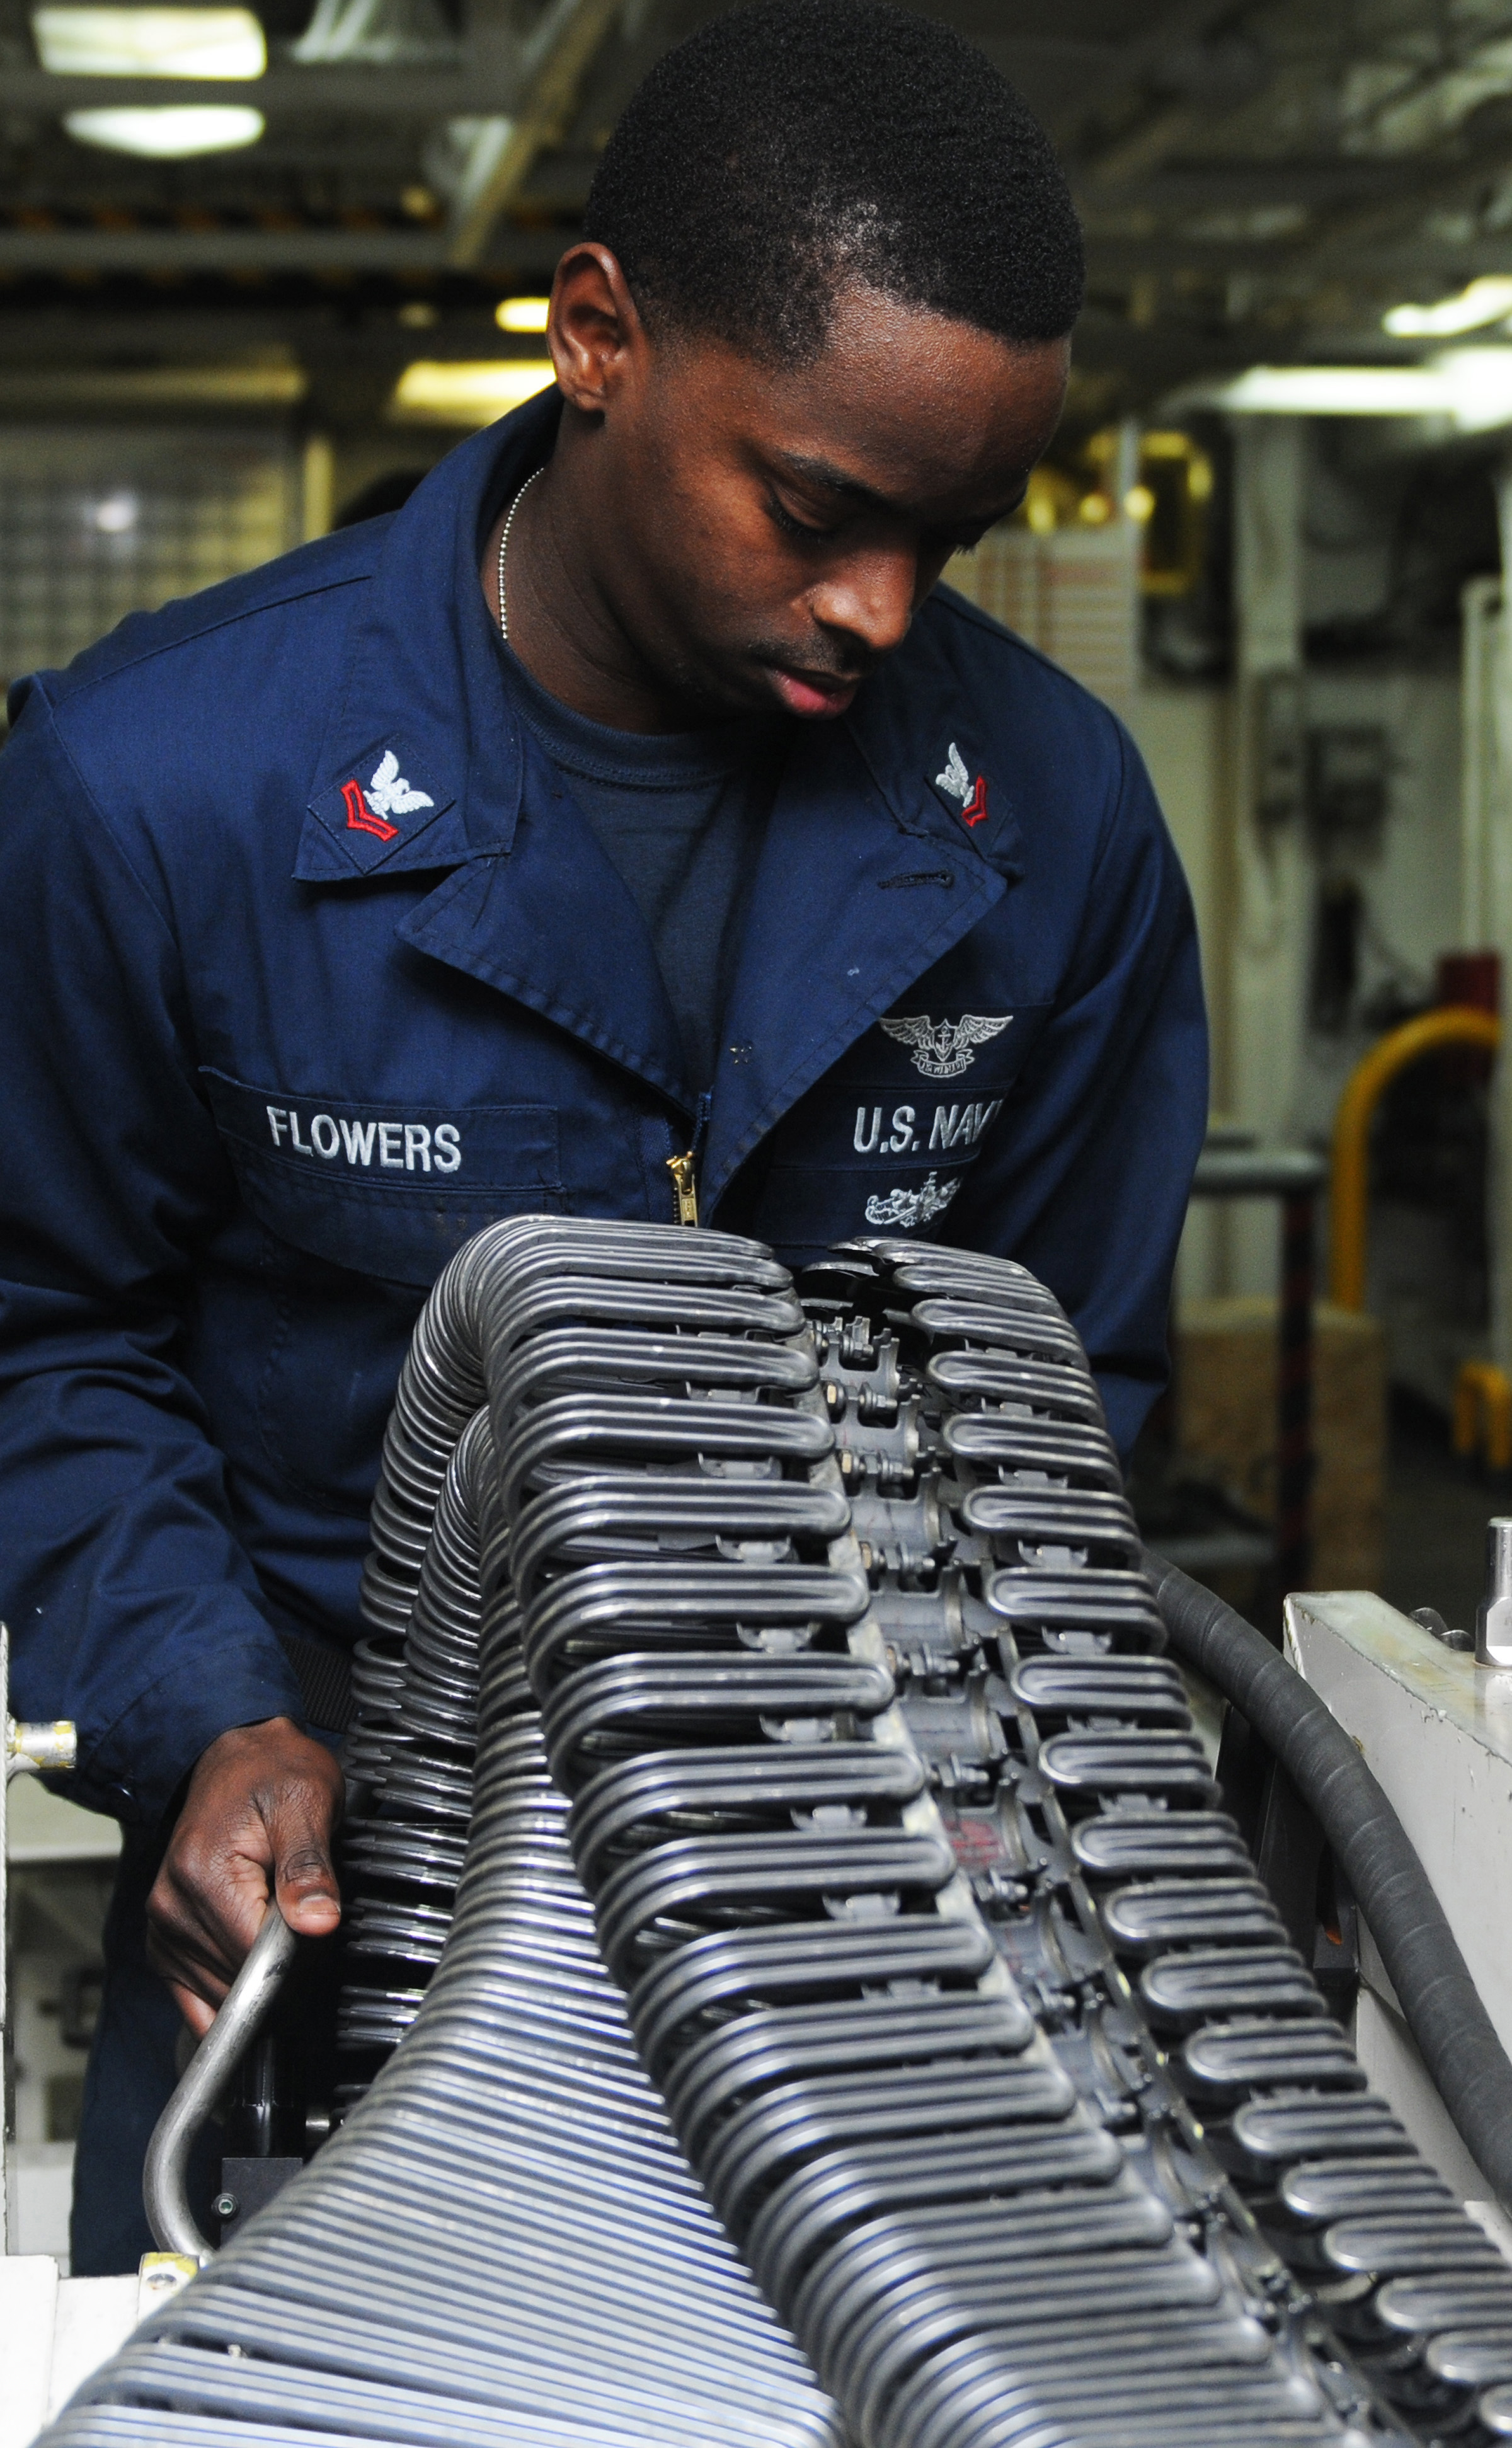 US Navy 120127-N-KQ416-003 Aviation Ordnanceman 2nd Class Timothy A. Flowers verifies a linkless ammunition loading system (LALS) for certification